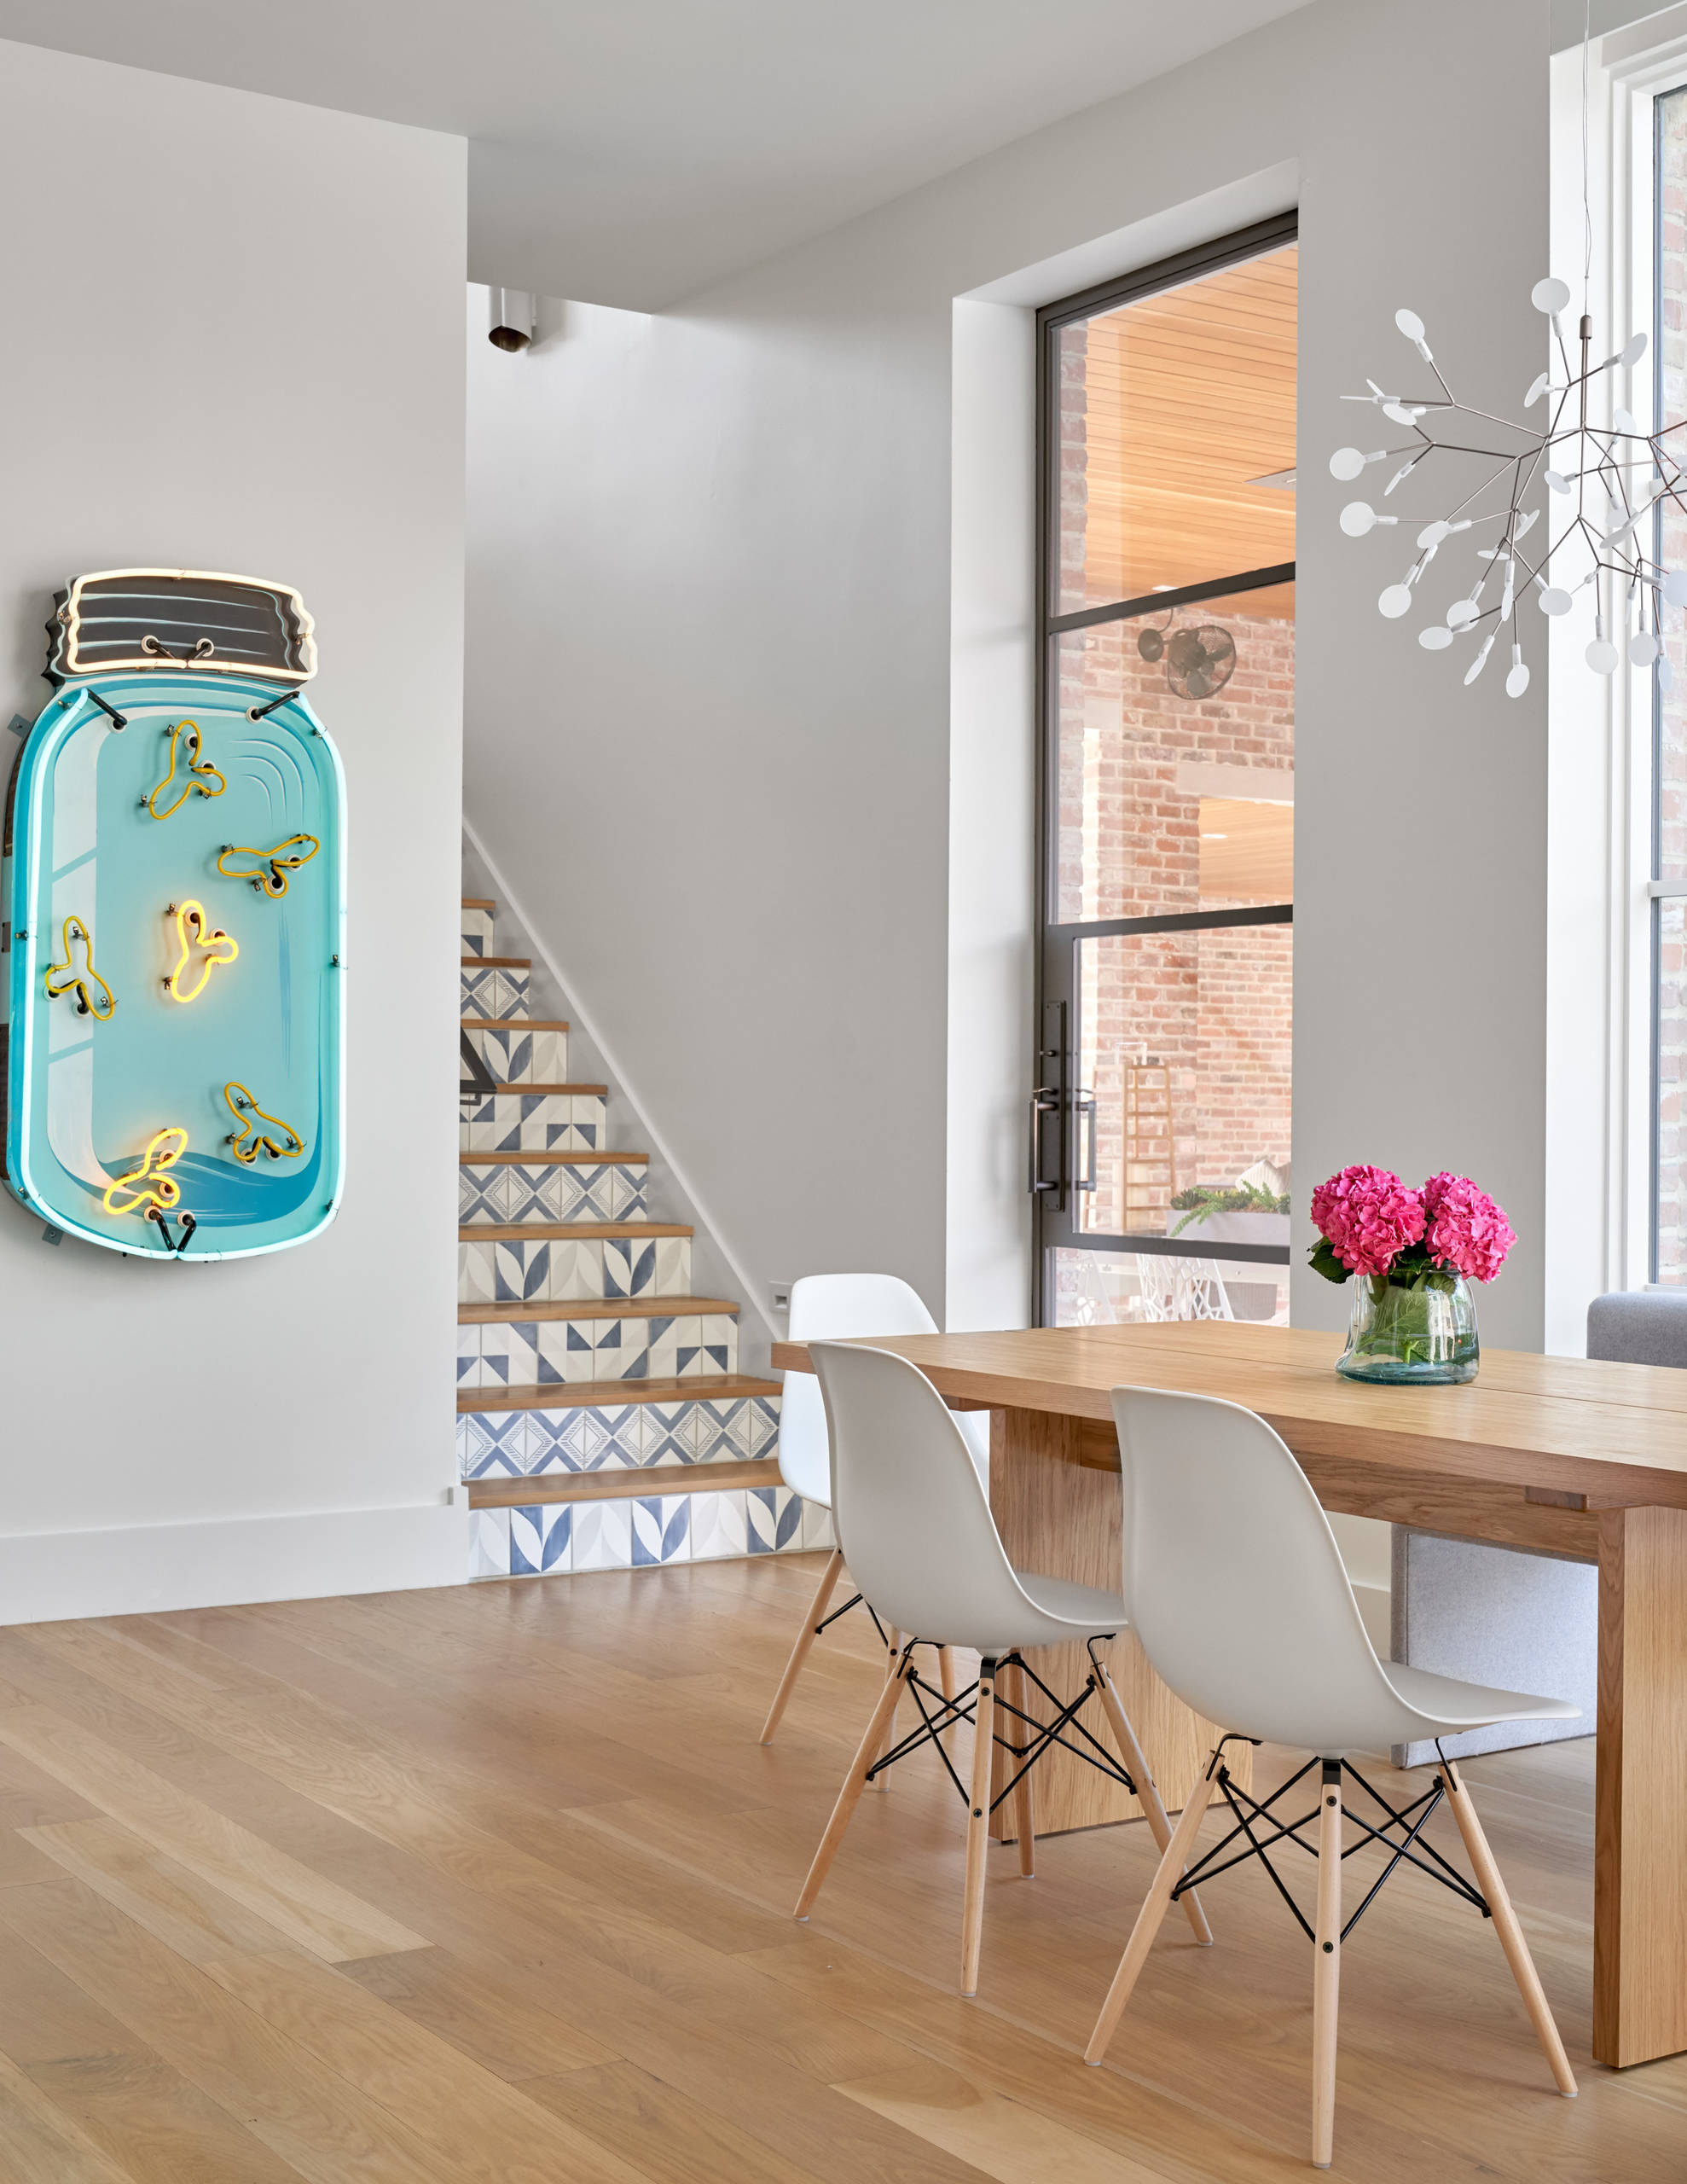 Whimsical, Popular and Unique Fish Wall Decor Ideas, Home Wall Art Decor